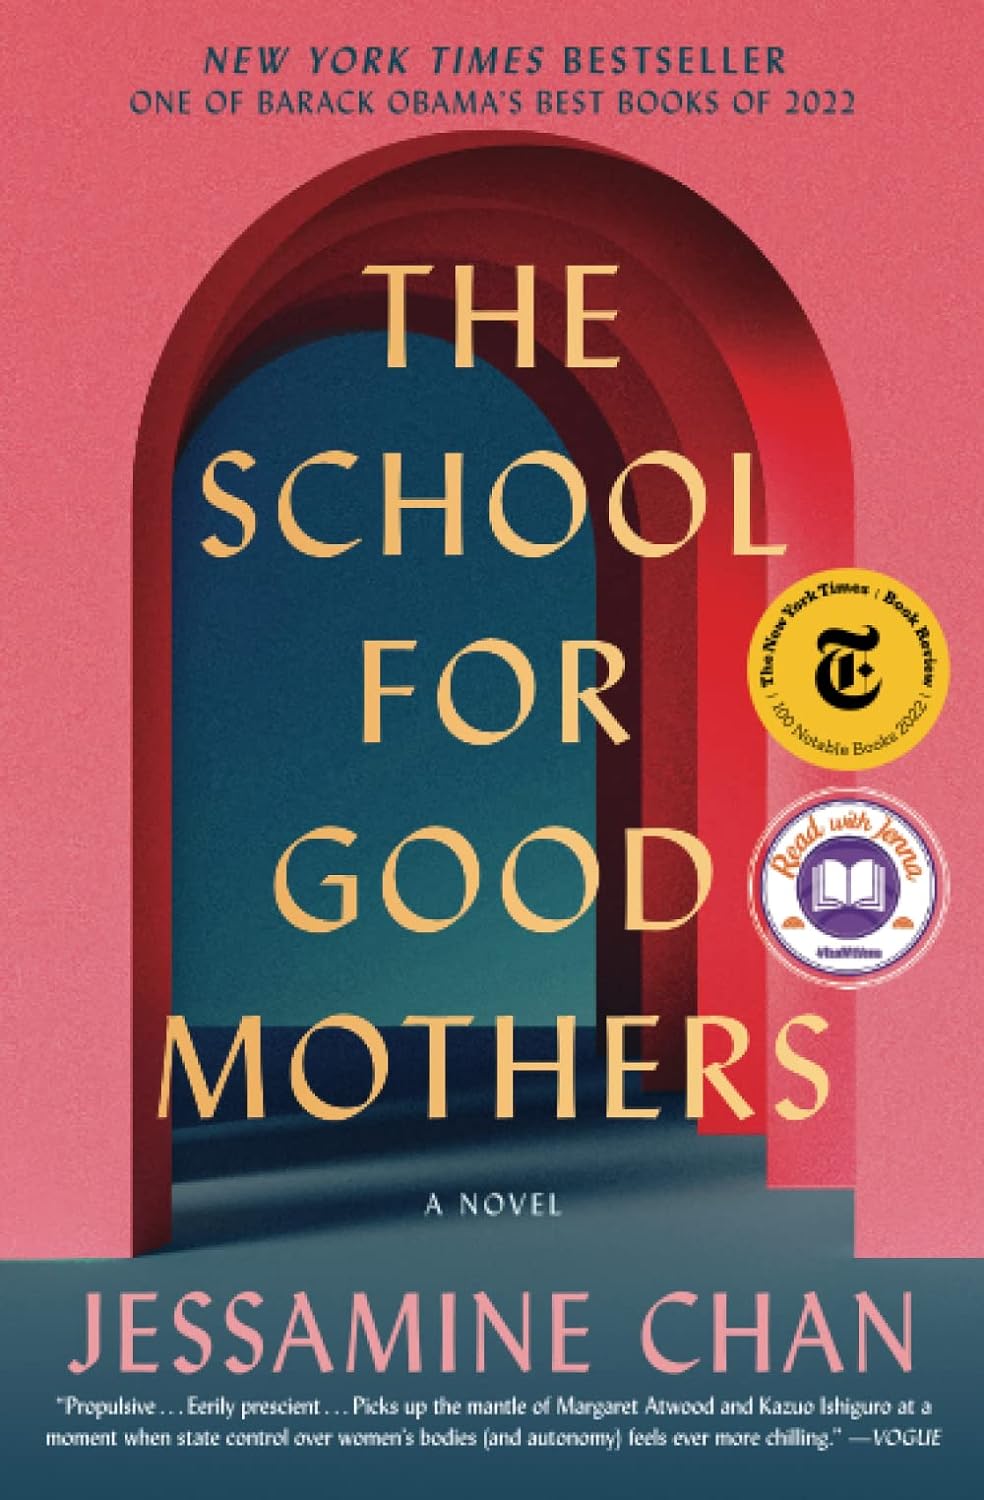 See The School for Good Mothers in Library Catalog